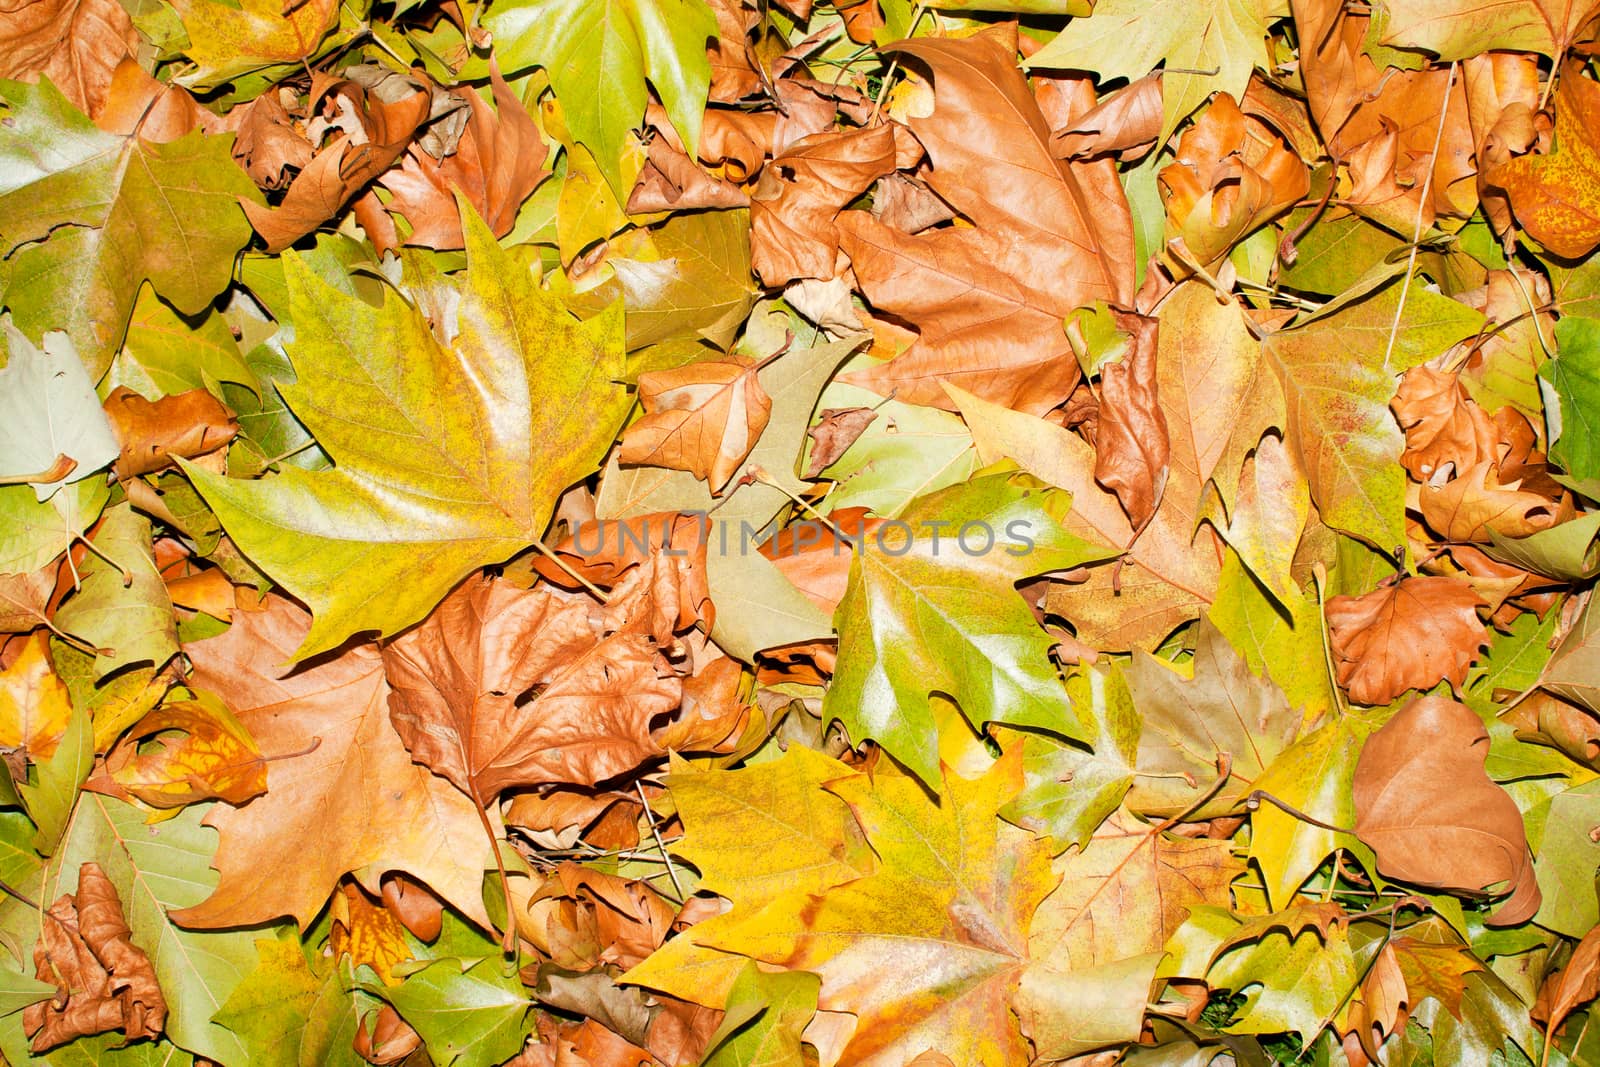 Fallen autumn leafs for background by maggee